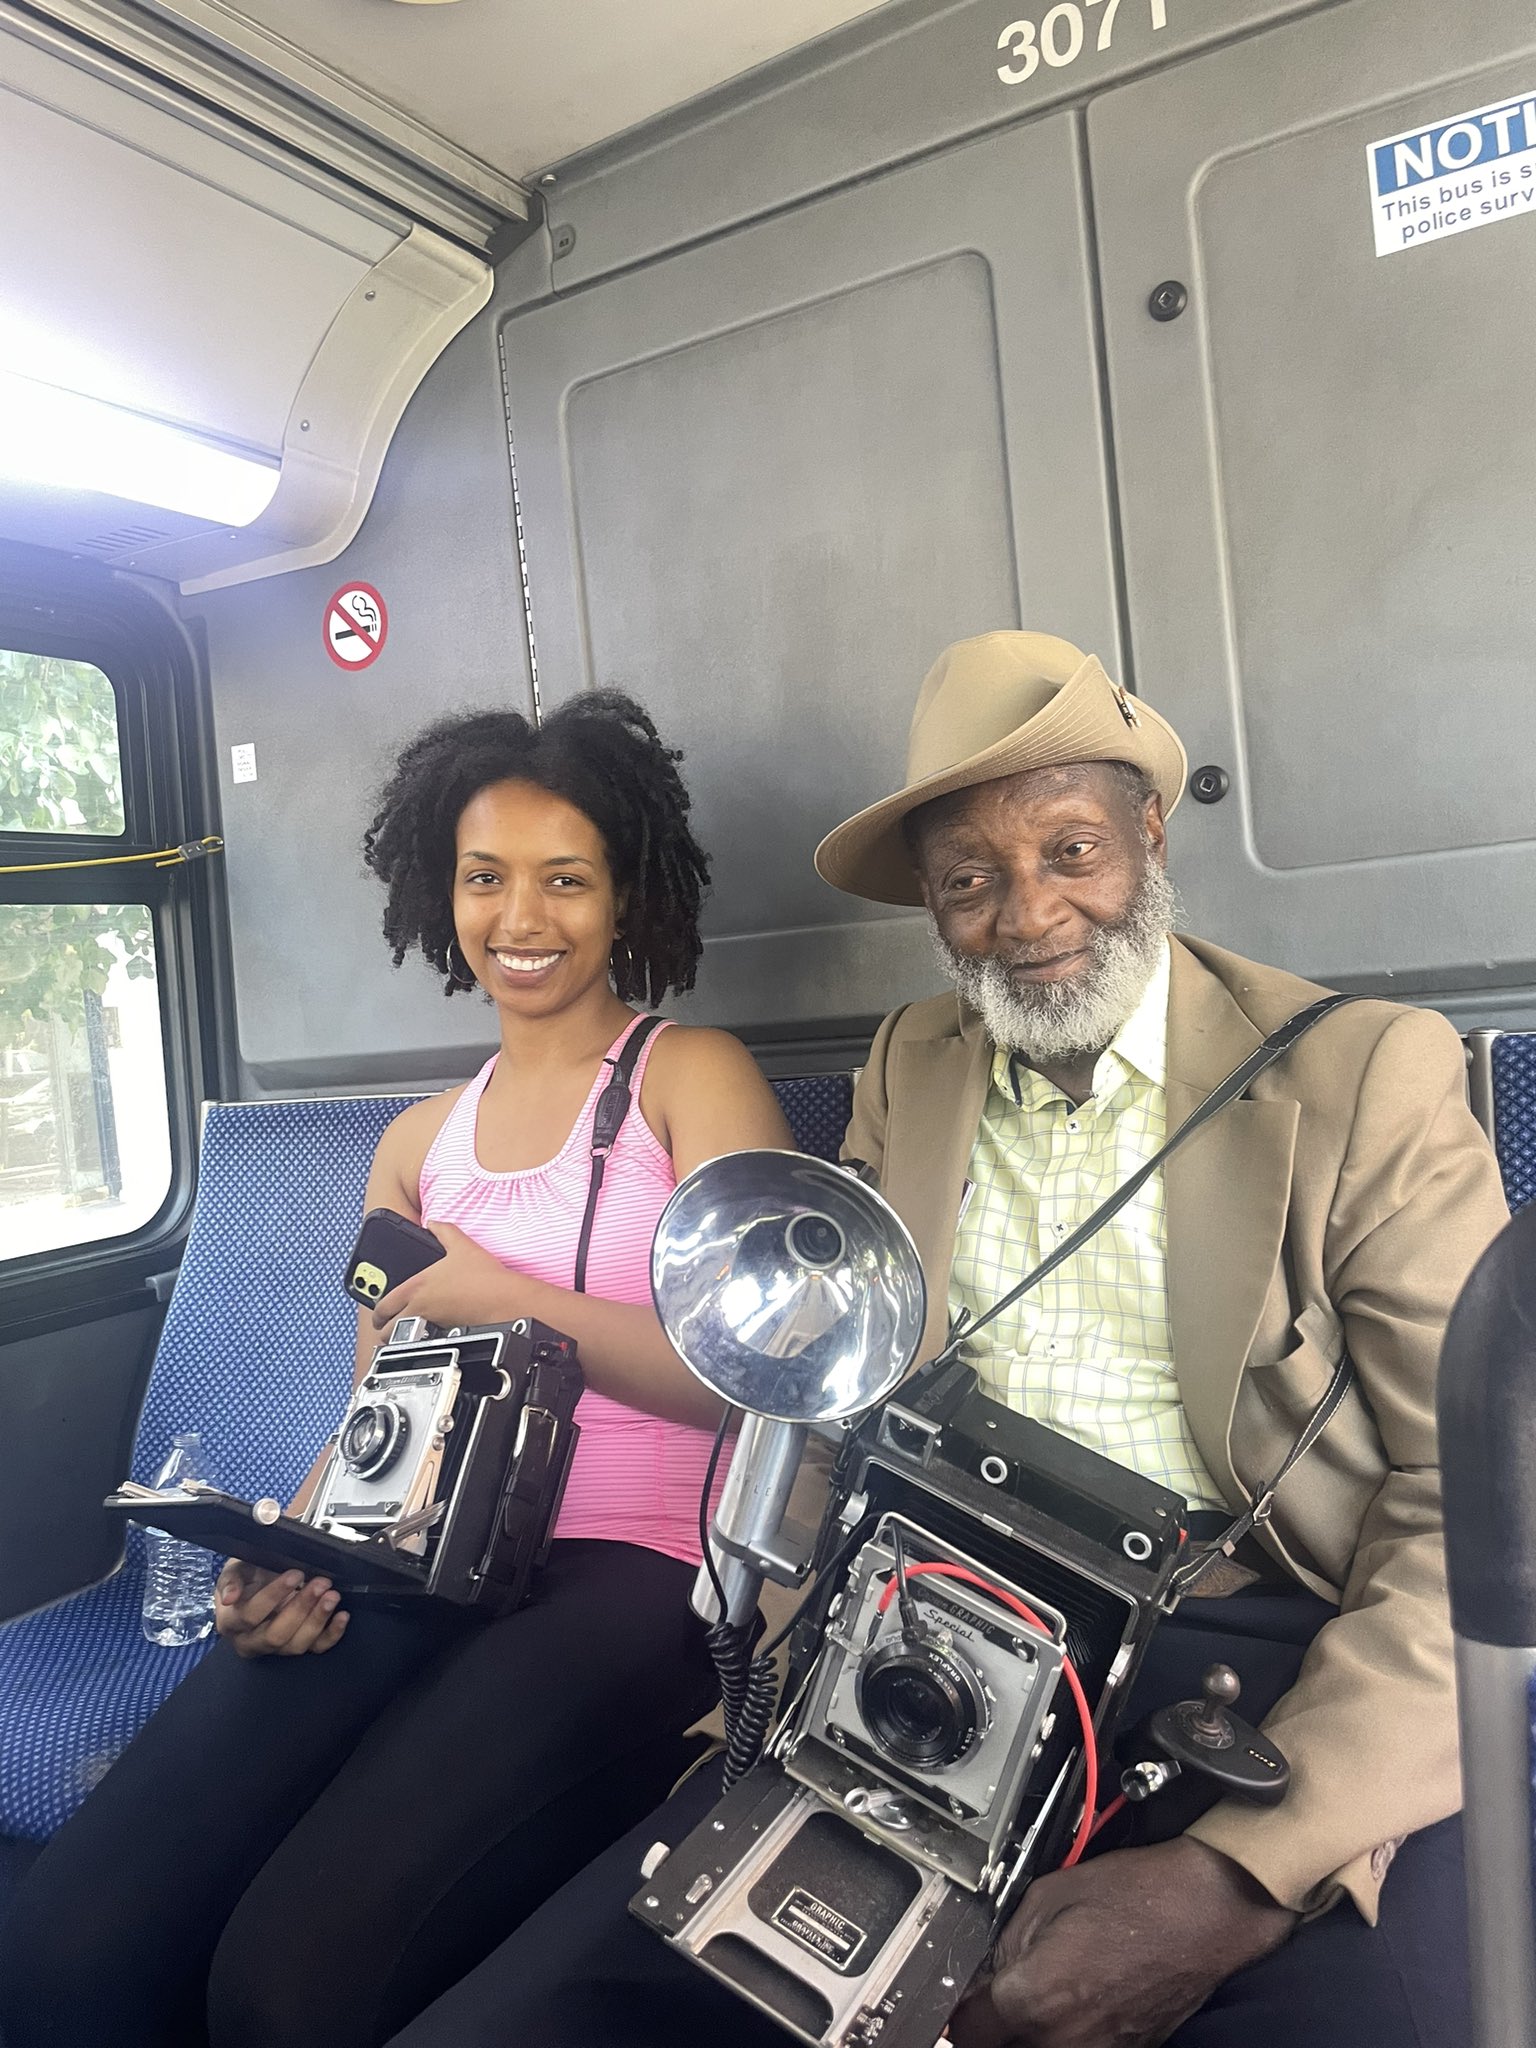 wannabe maxine shaw🪐 on X: today i met louis mendes, an 83 year old  street photographer from New York known for his signature 1940 press camera  and a student he's currently mentoring